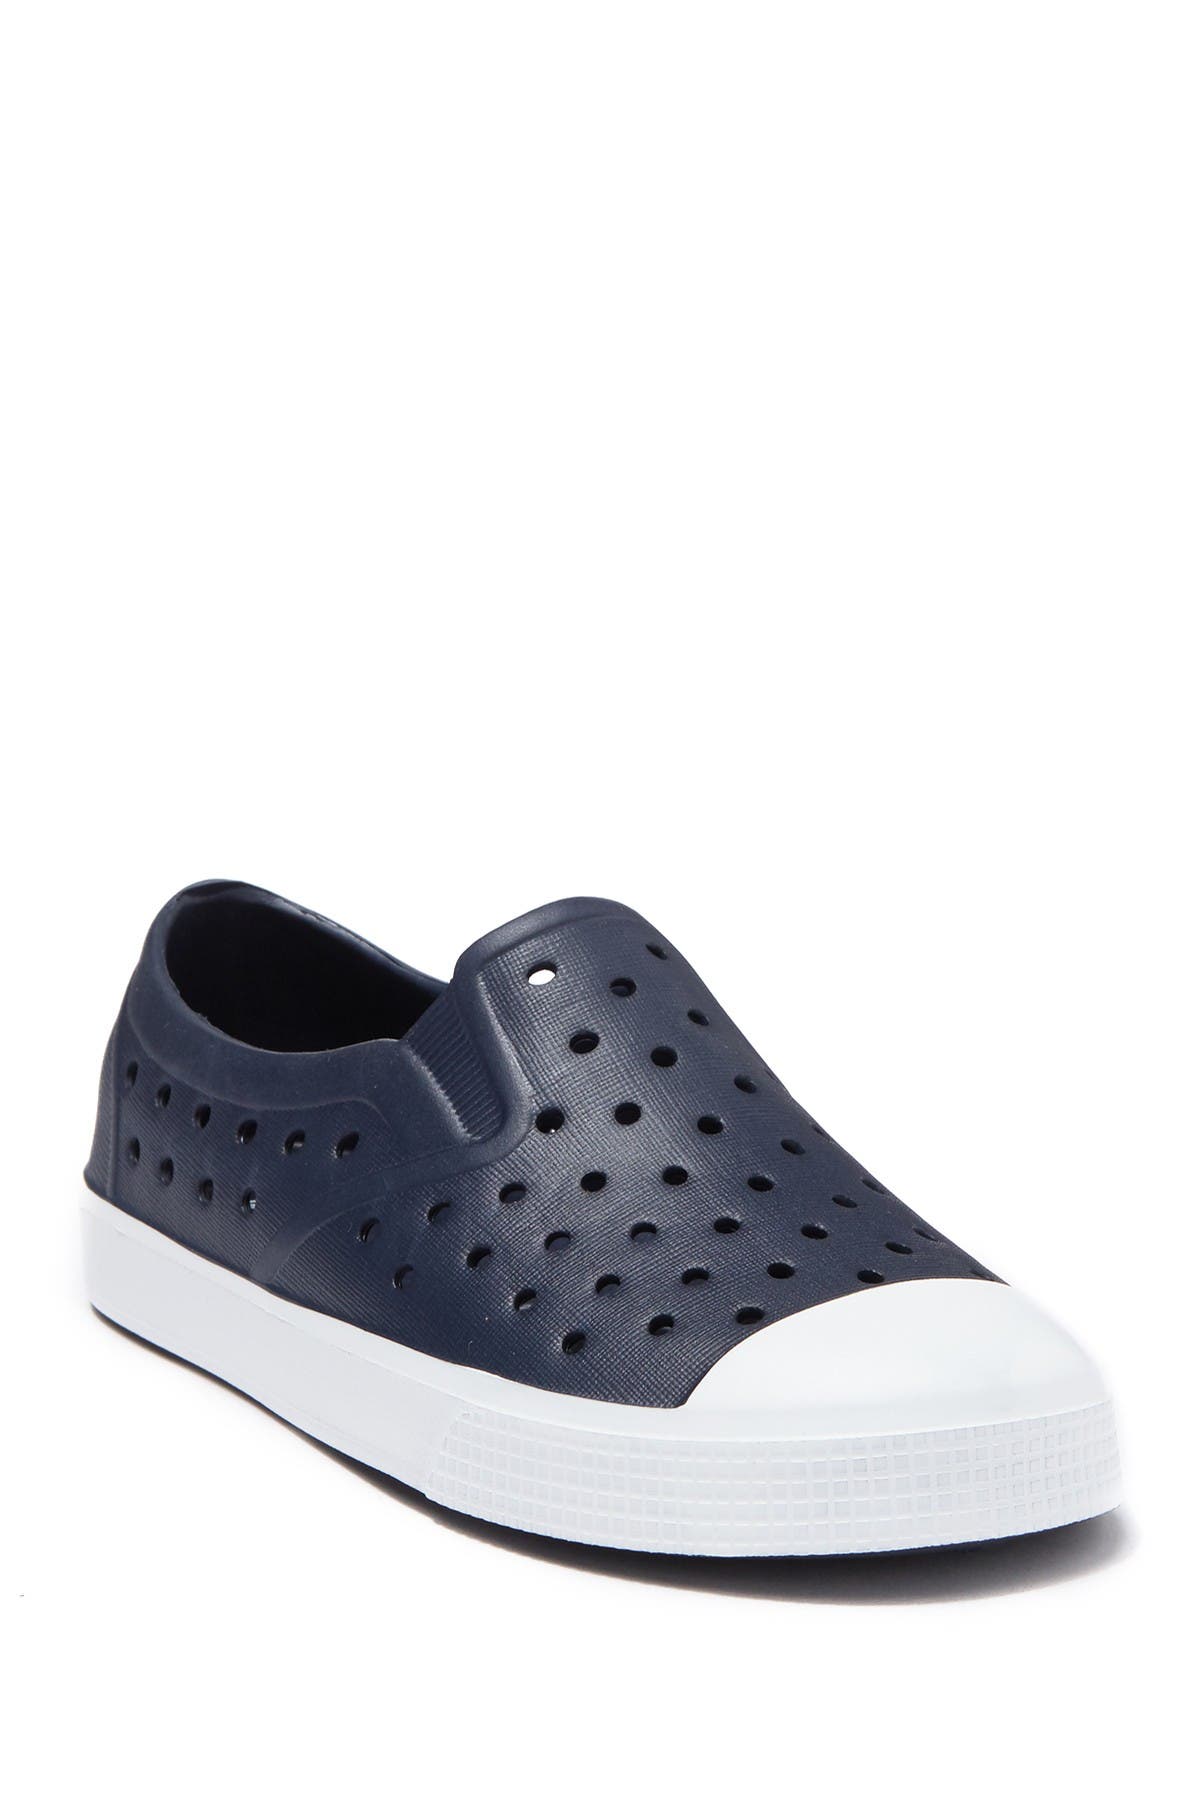 nordstrom boys shoes